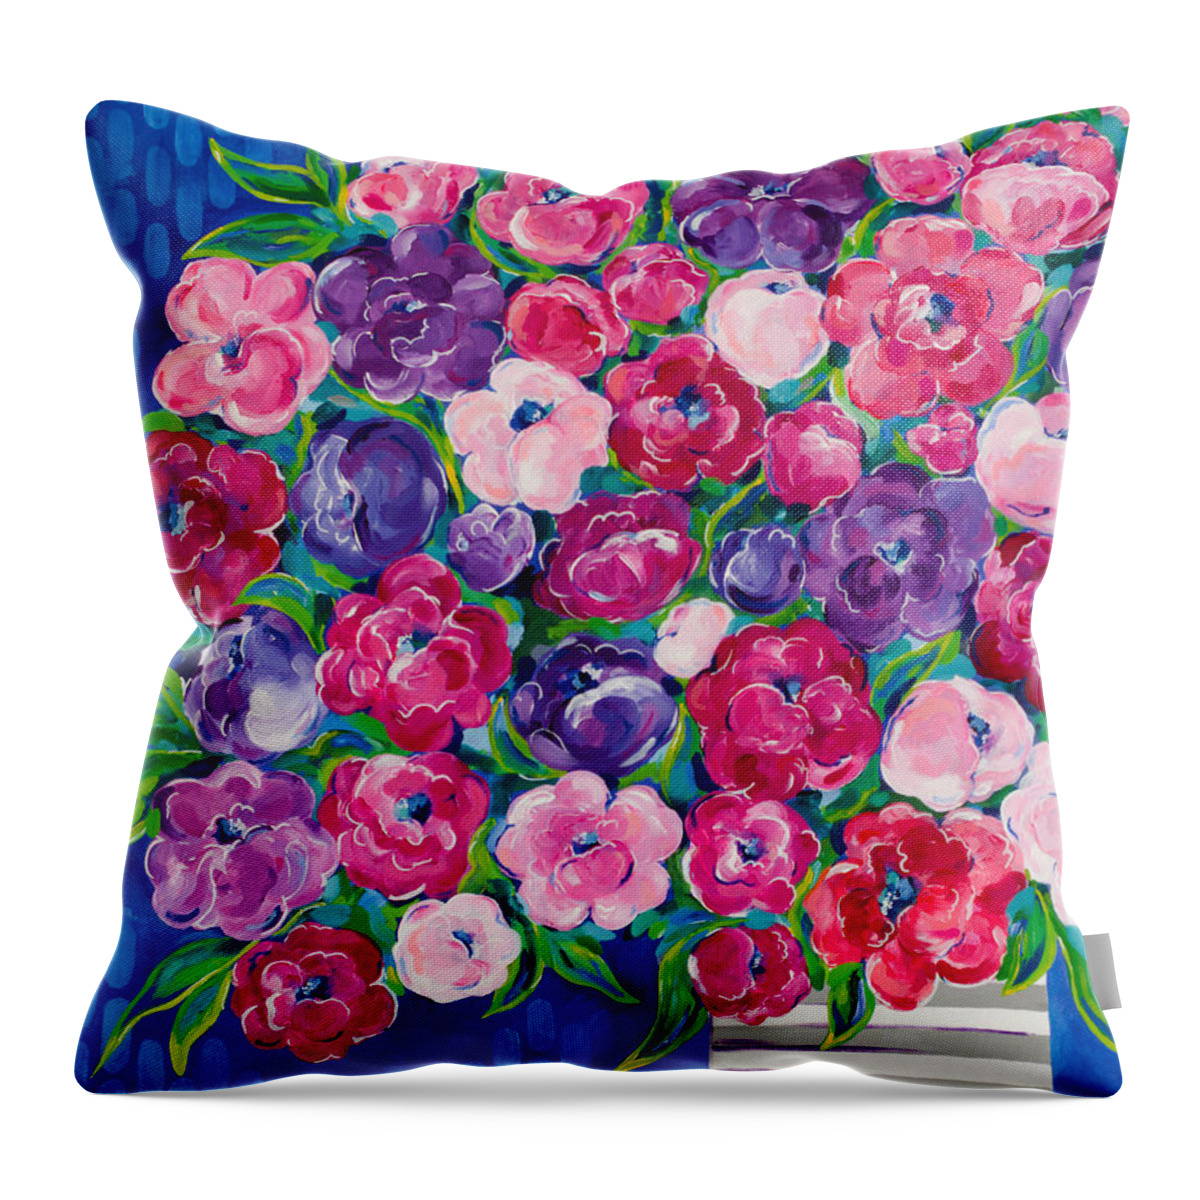 Flower Bouquet Throw Pillow featuring the painting Bountiful by Beth Ann Scott